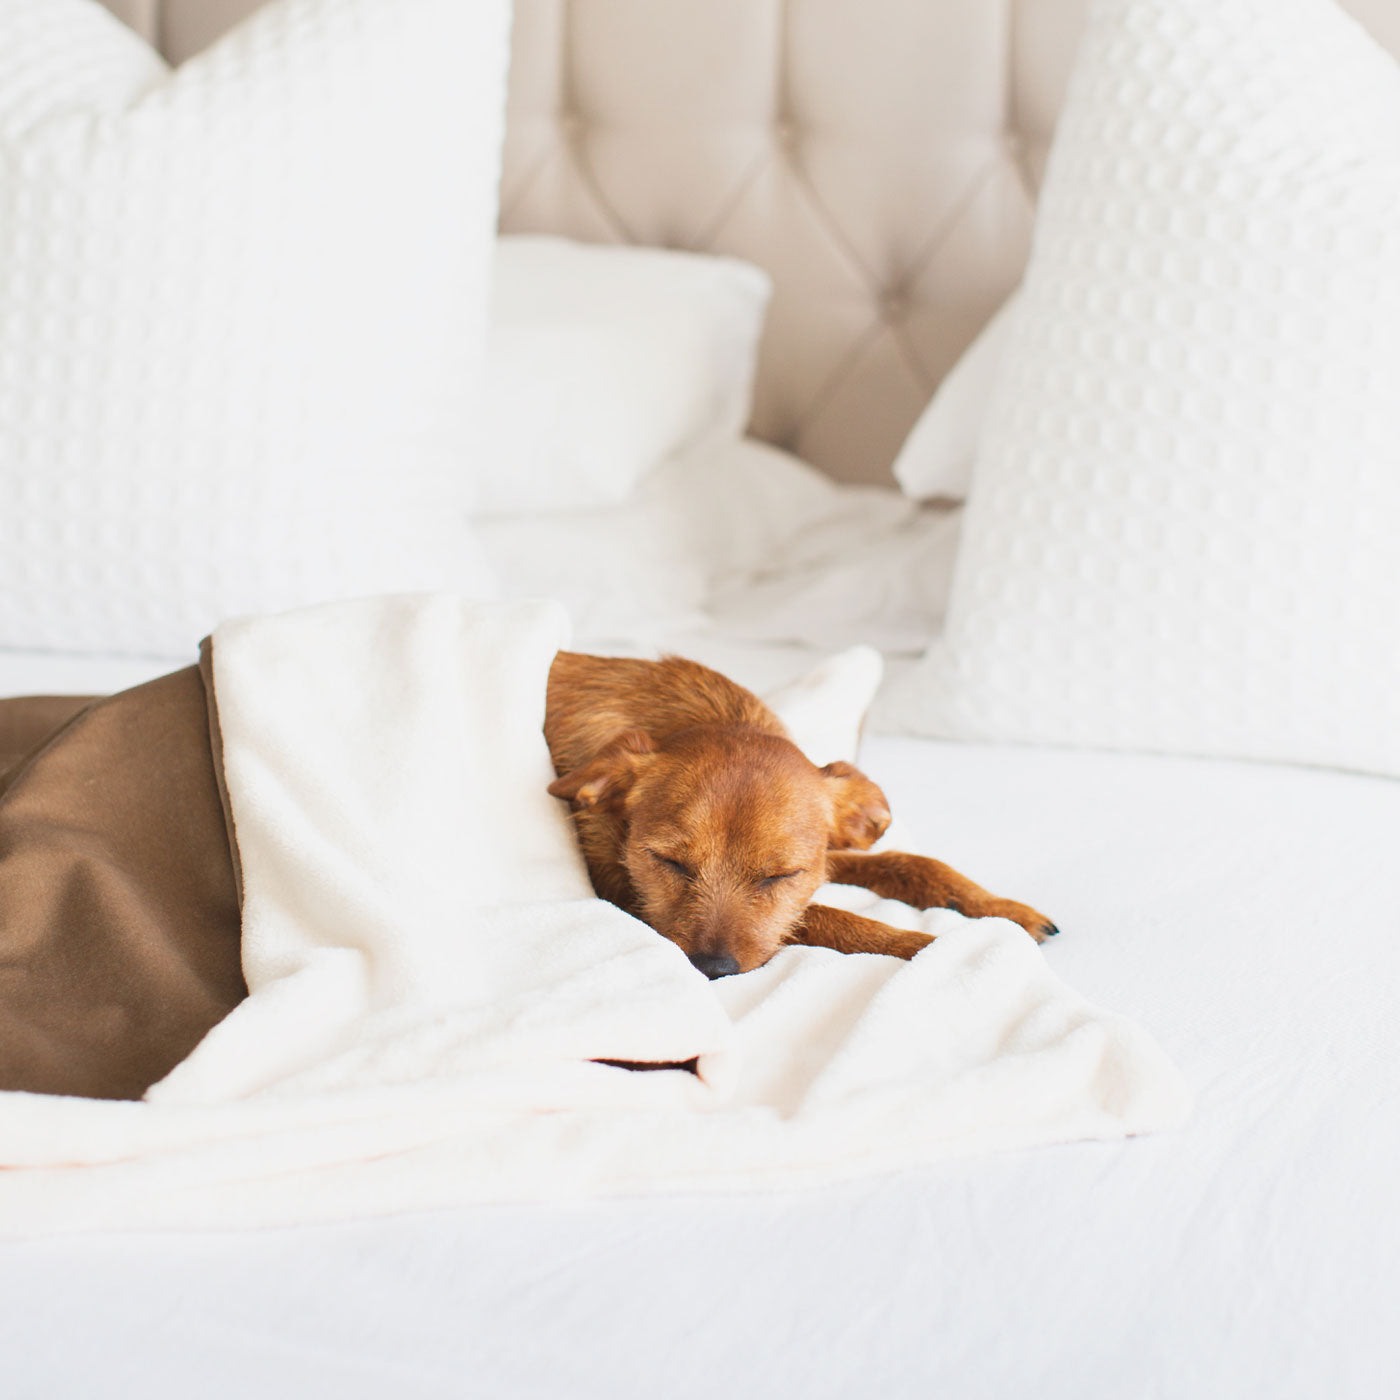  Discover Our Luxurious Mushroom Velvet Dog Blanket With Super Soft Sherpa & Teddy Fleece, The Perfect Blanket For Puppies, Available To Personalise And In 2 Sizes Here at Lords & Labradors